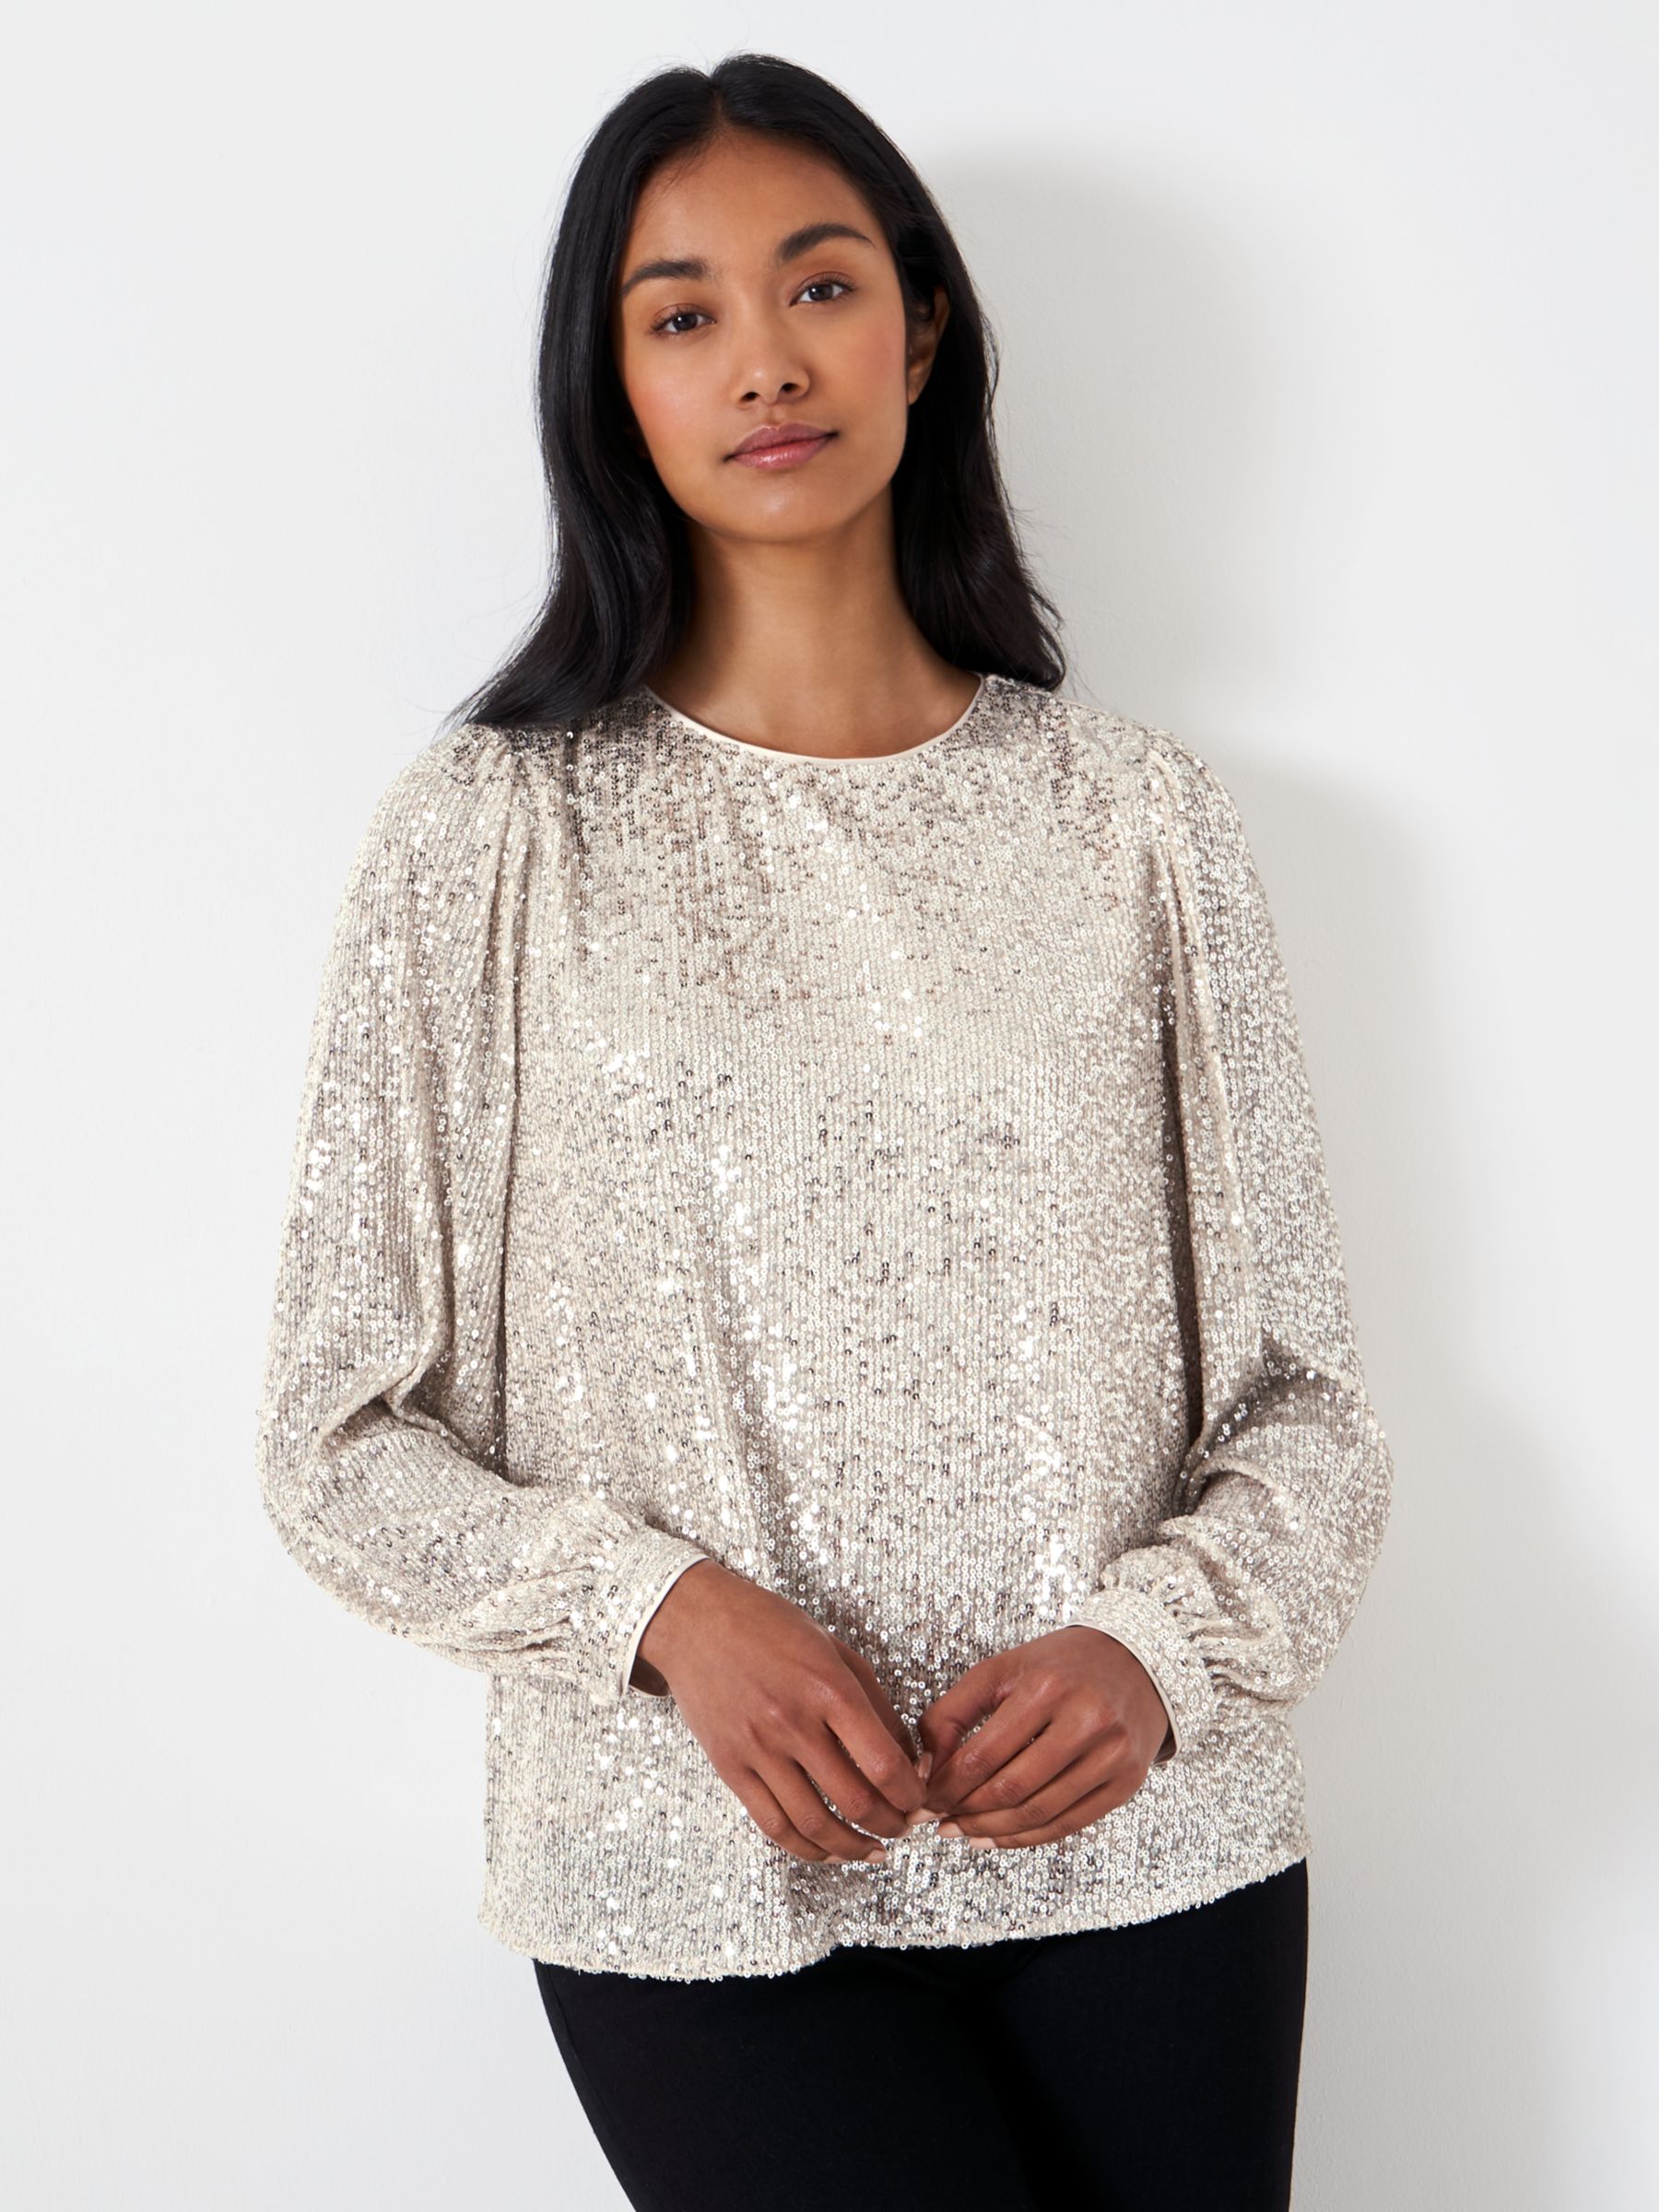 Buy Crew Clothing Eve Sequin Top, Silver Online at johnlewis.com